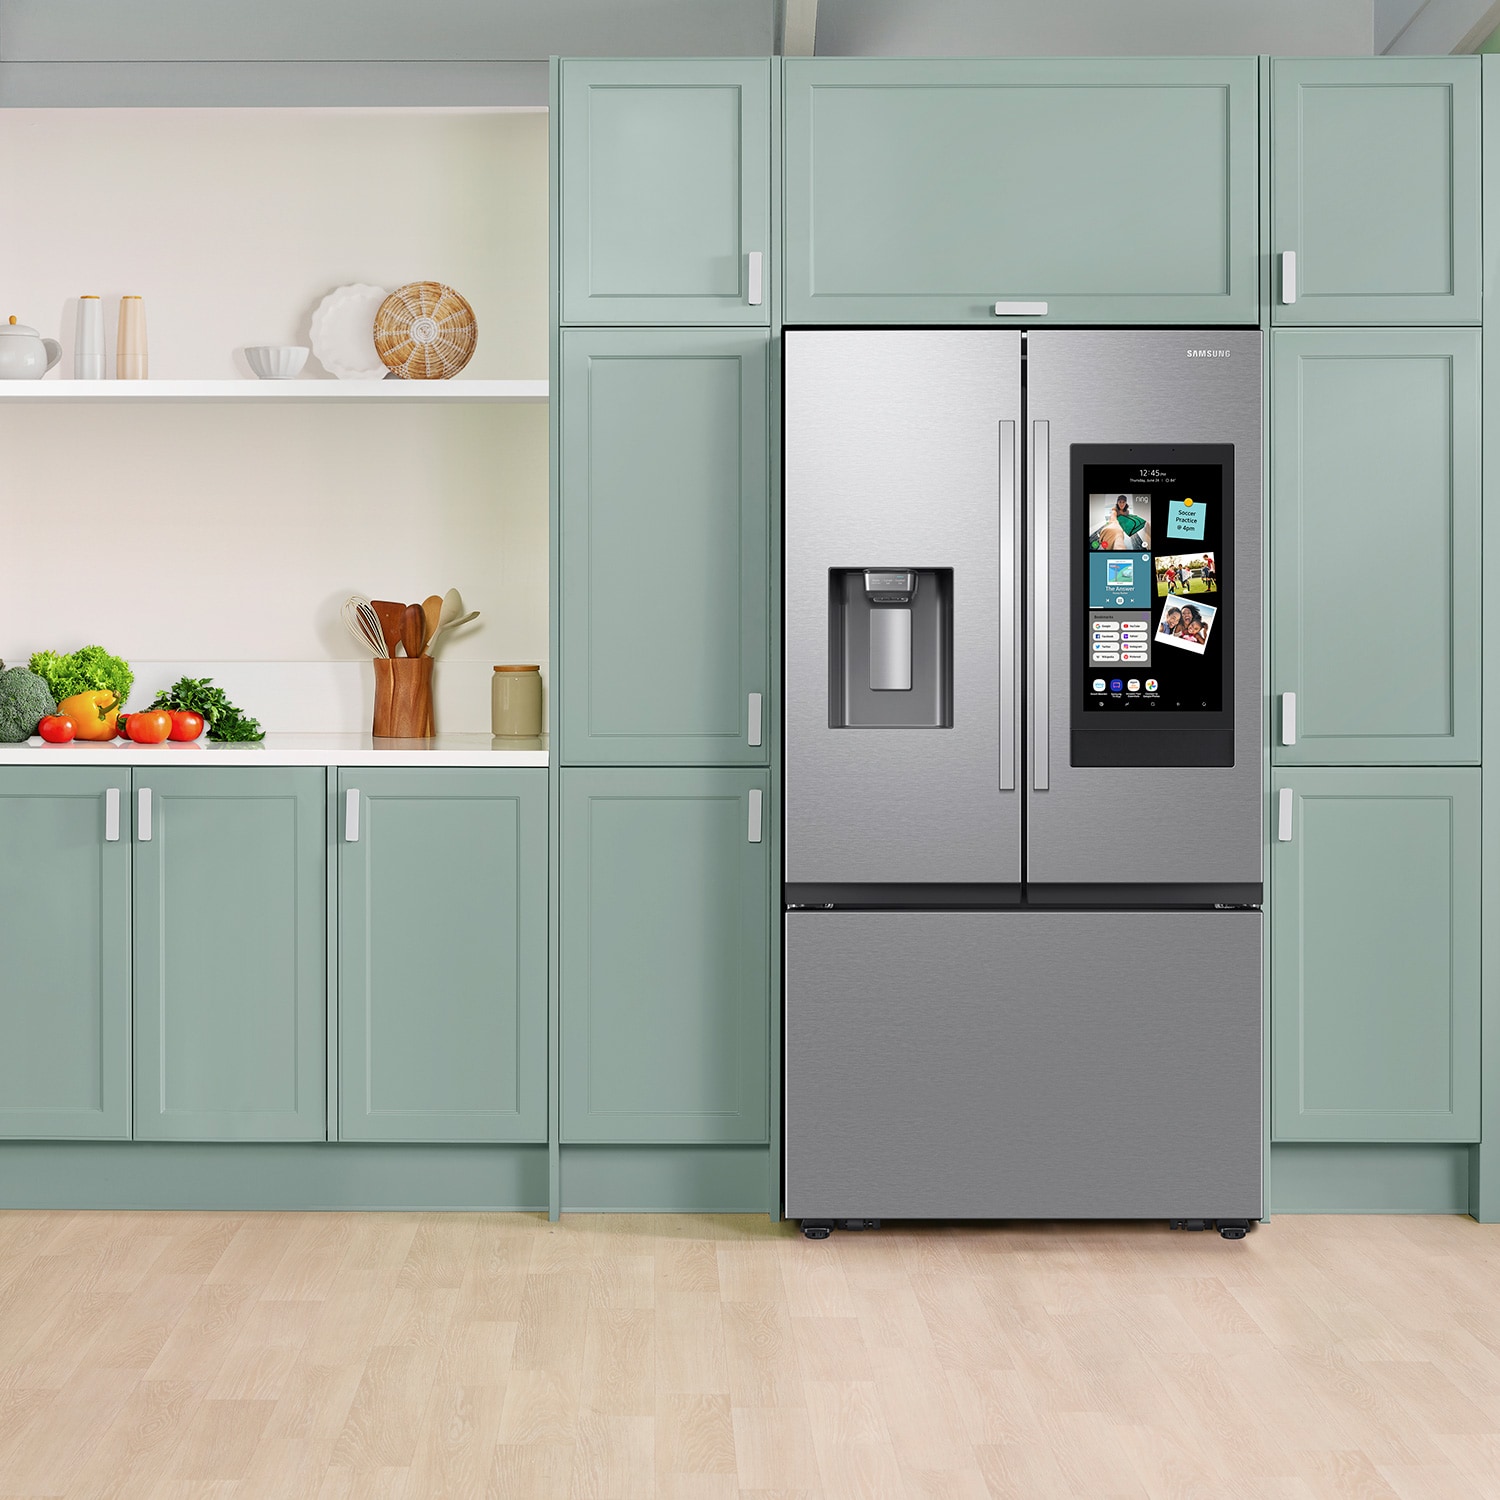 Samsung Family Hub 26.5-cu ft Smart French Door Refrigerator with Ice Maker  (Fingerprint Resistant Stainless Steel) ENERGY STAR at